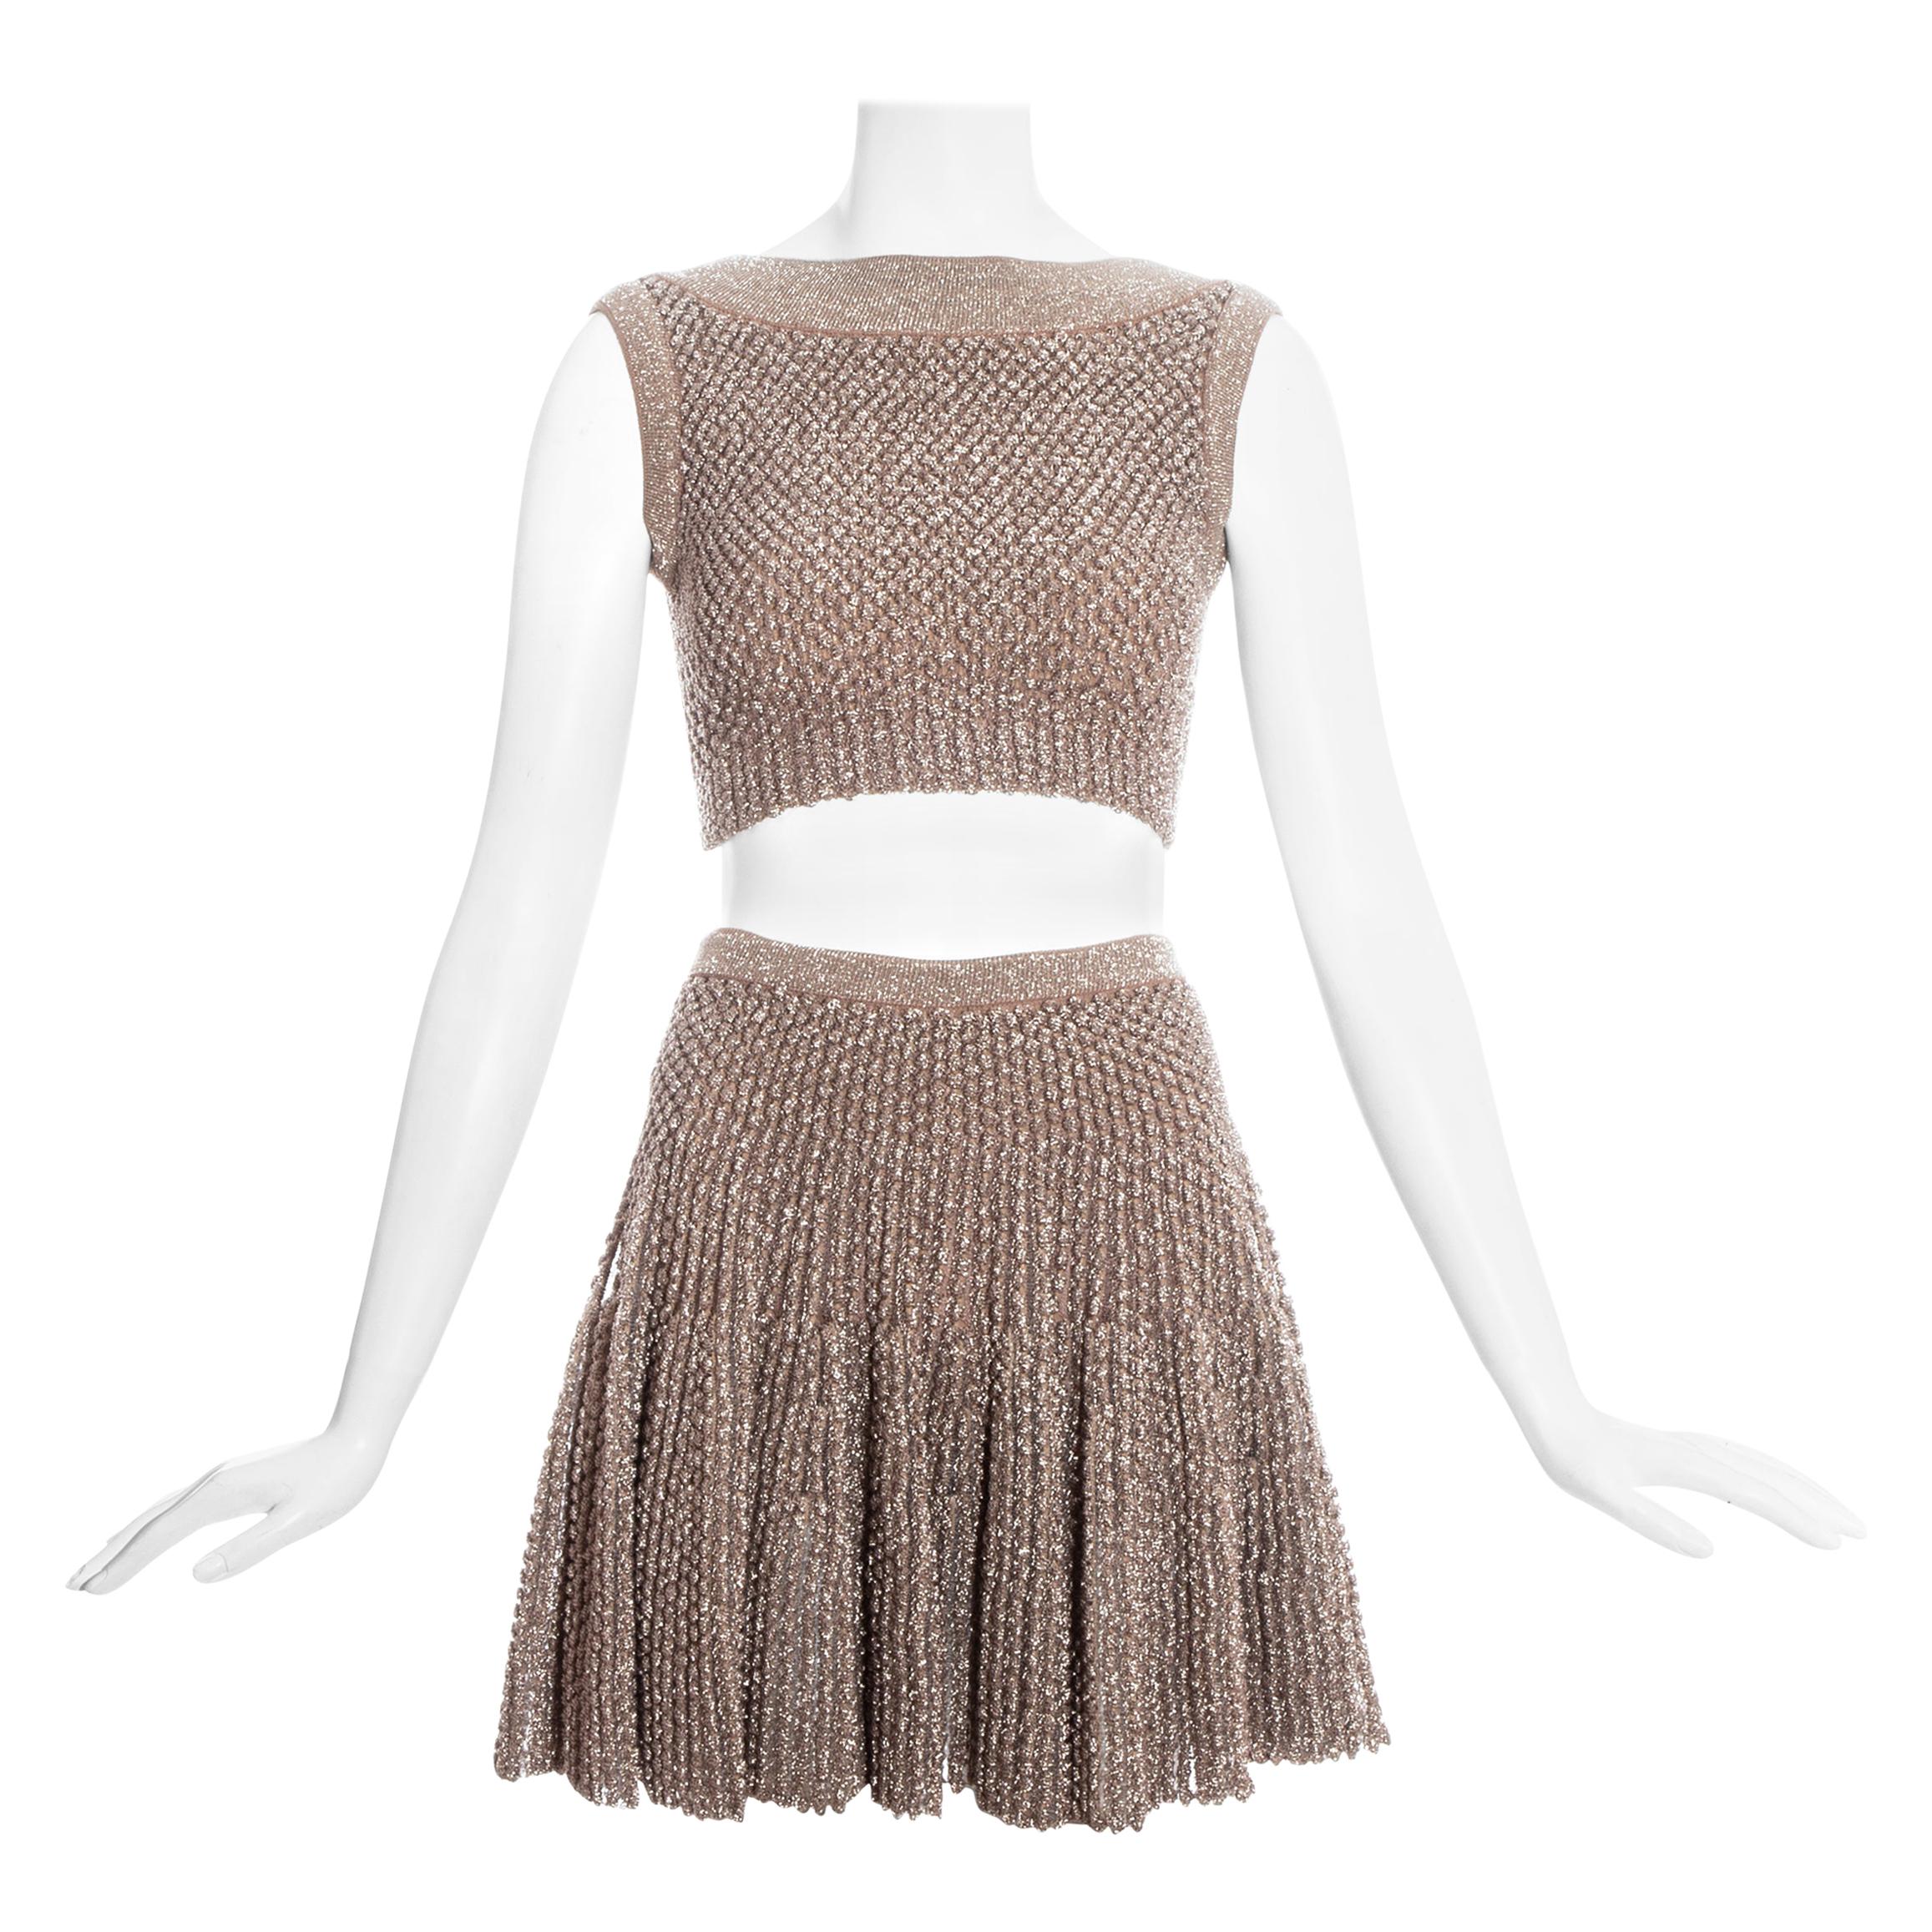 Azzedine Alaia metallic knitted crop top and skater skirt set, ss 2015